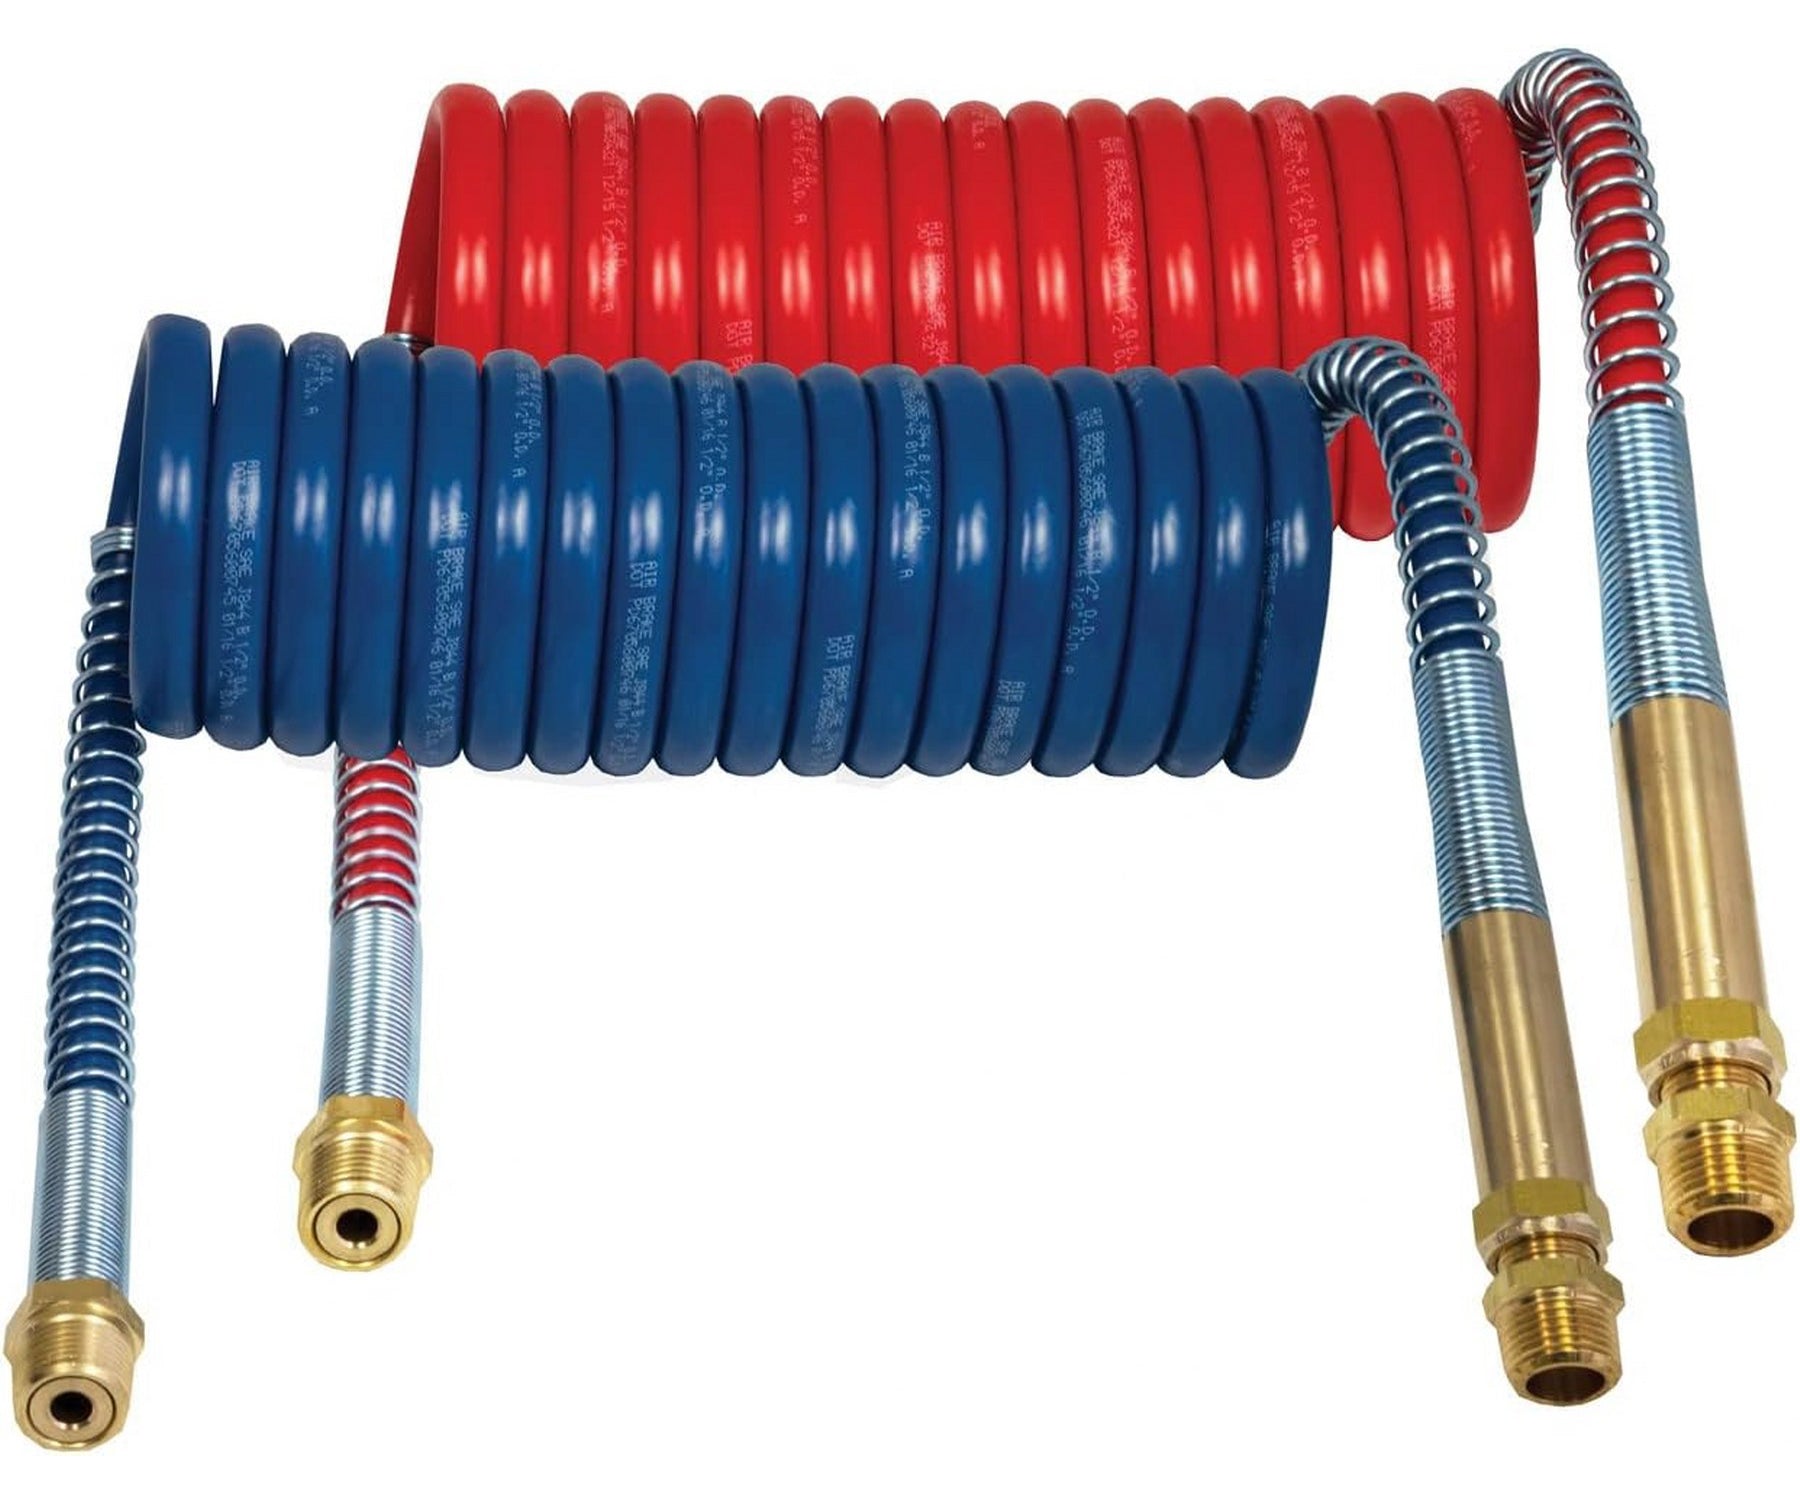 Tectran Industry Grade Aircoil Brake Assembly Set w/Brass Handles | Red & Blue Set, 15' Length x 12" Tractor Lead